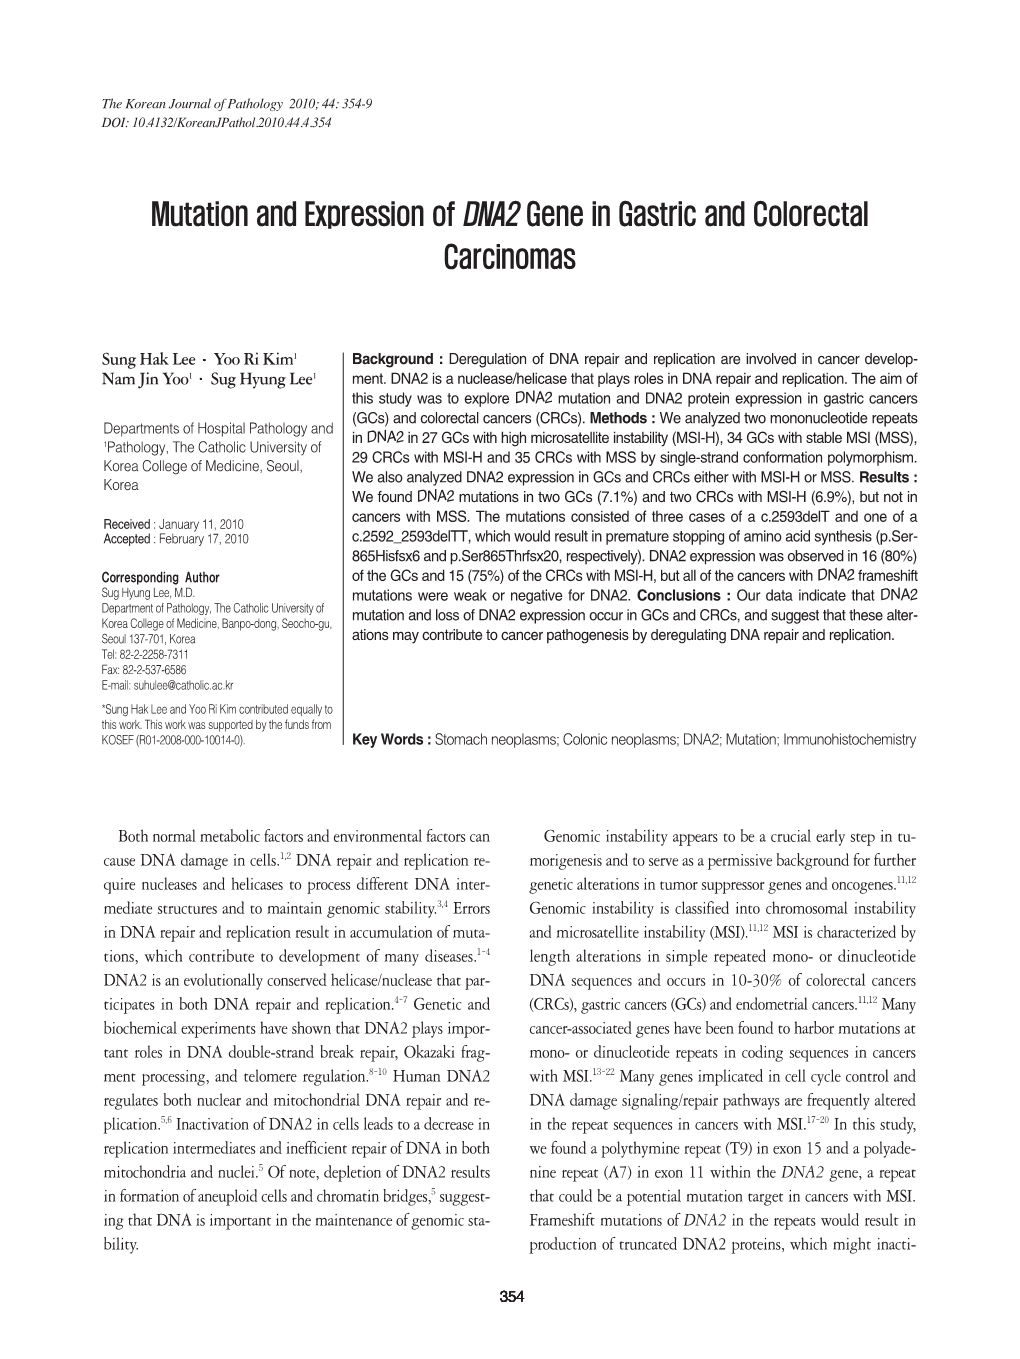 Mutation and Expression of DNA2 Gene in Gastric and Colorectal Carcinomas